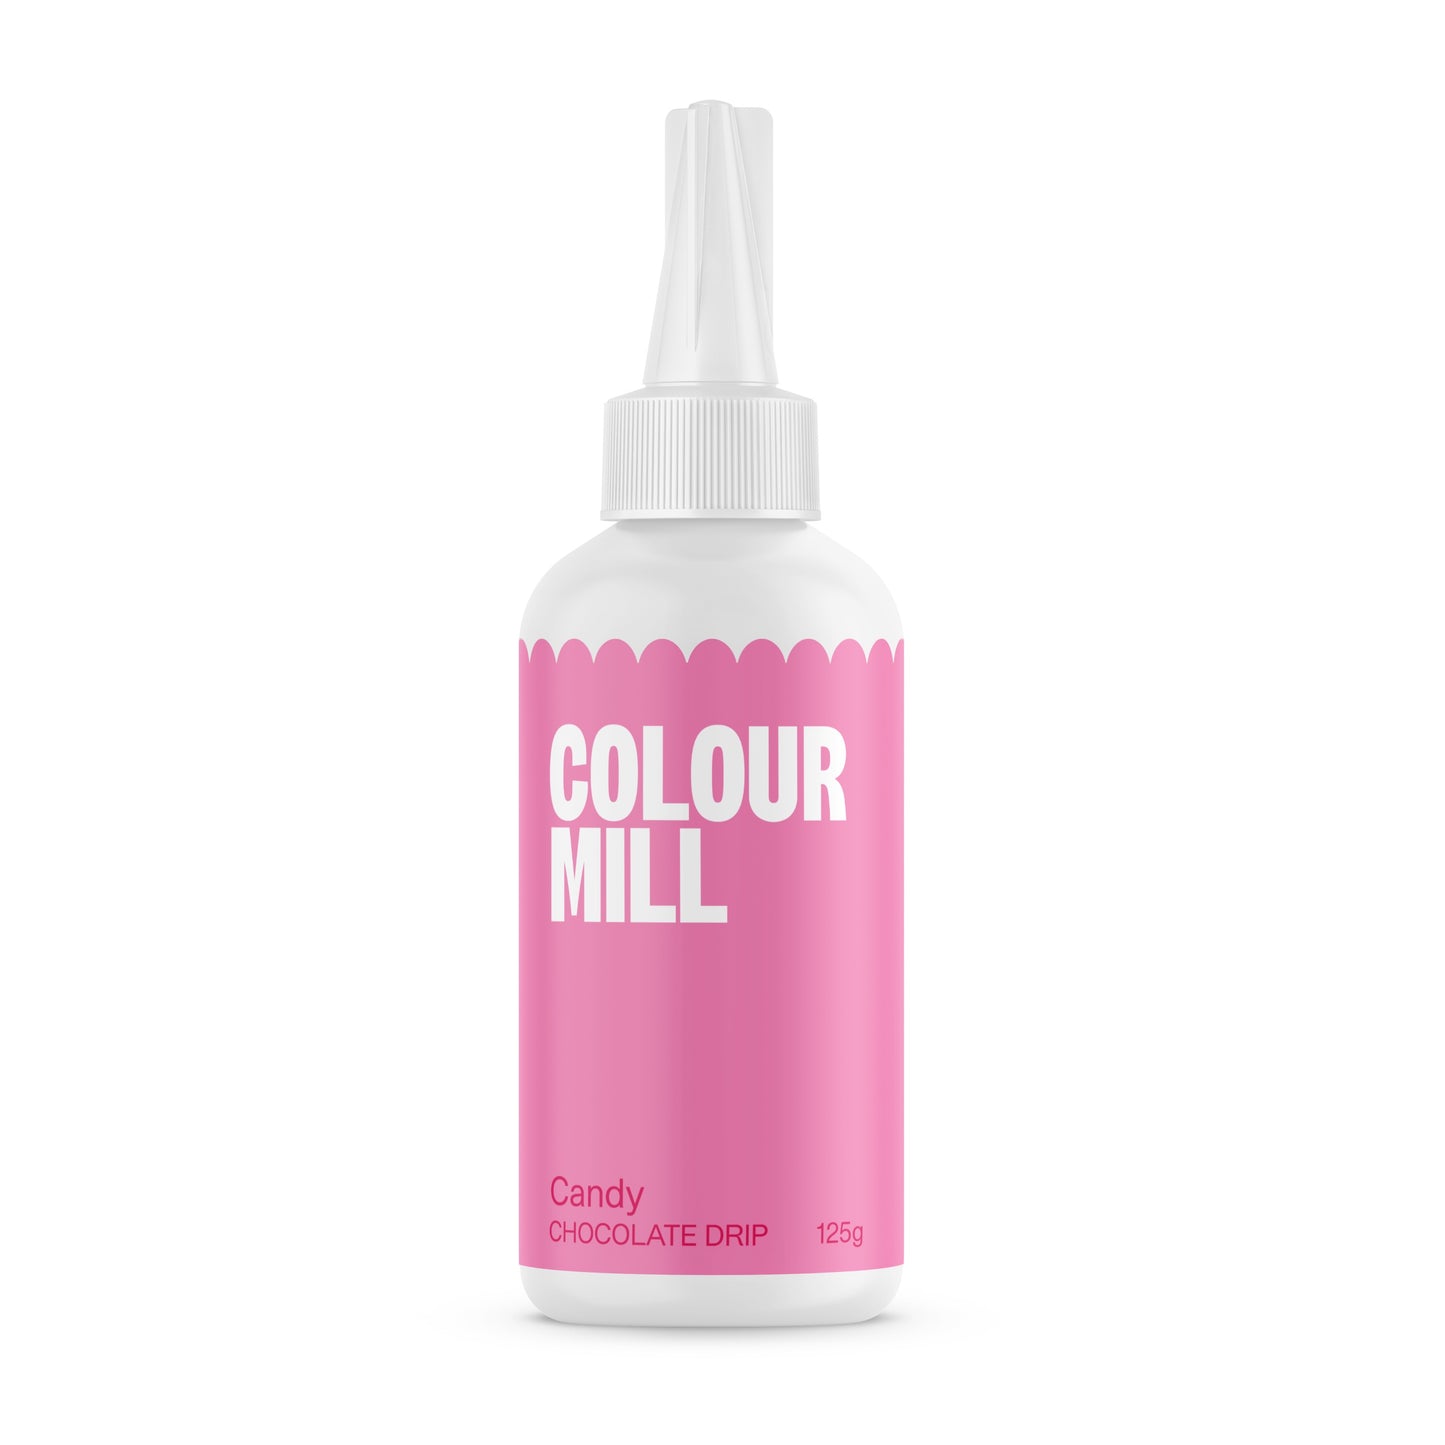 Colour Mill Candy (Pink) Chocolate Drip